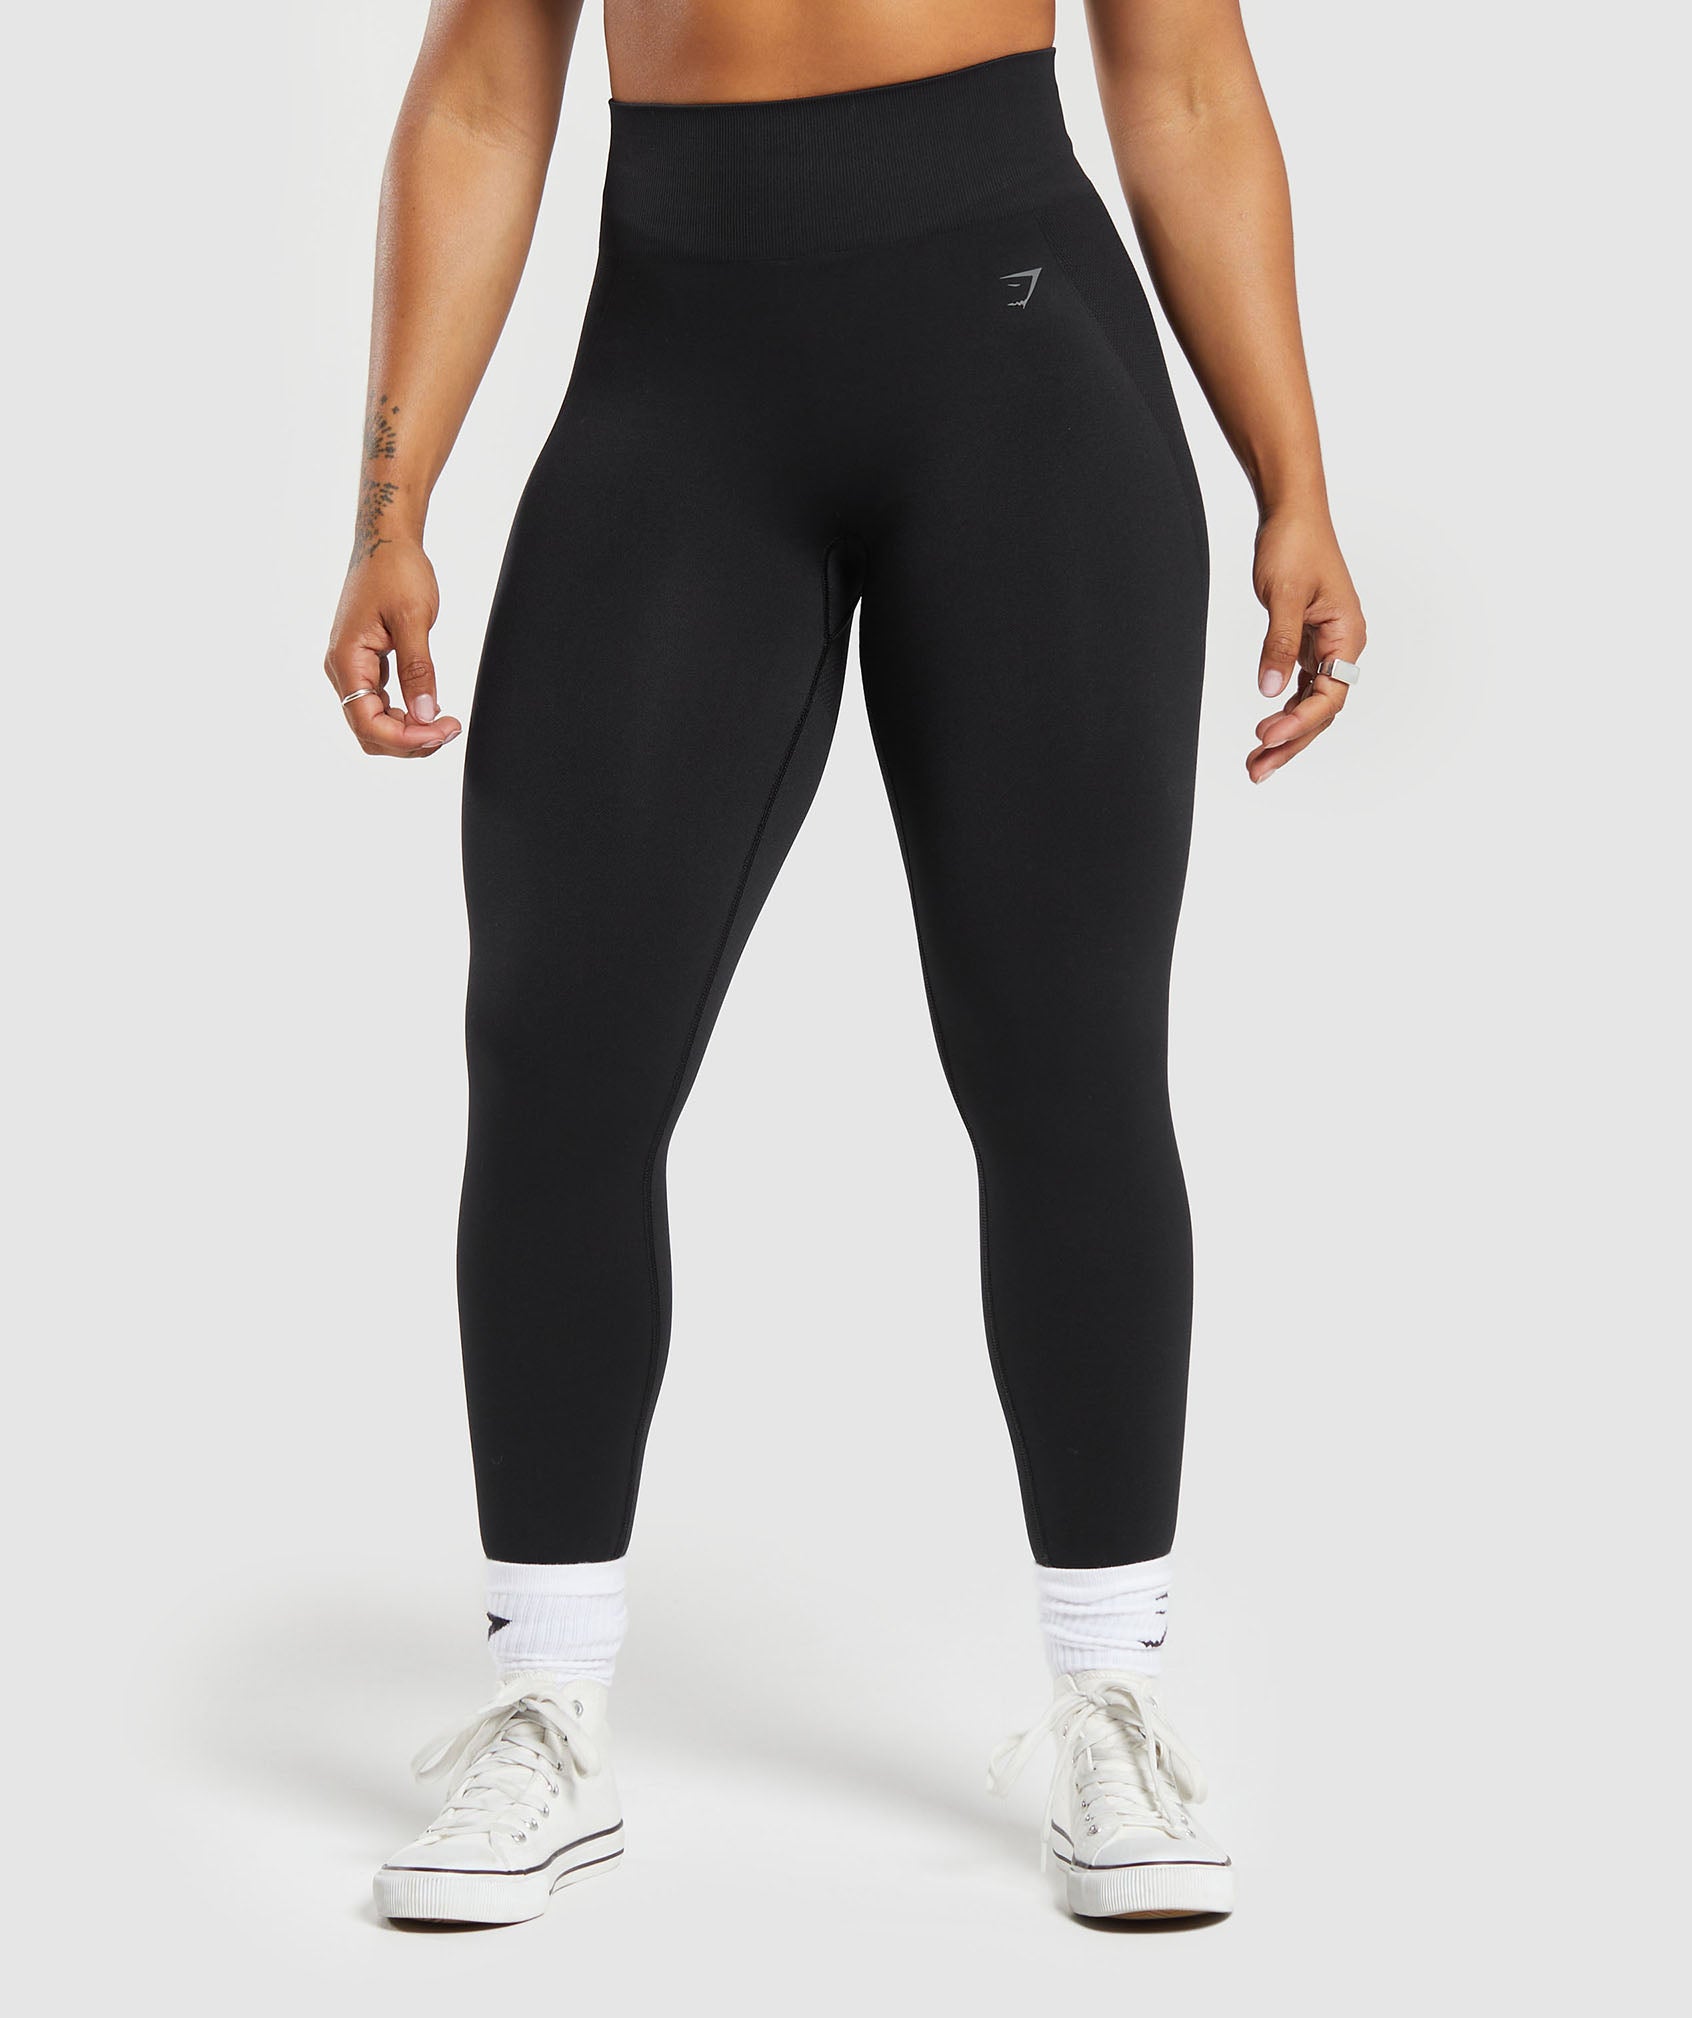 High Waist Seamless Sports Vital Seamless 2.0 Leggings For Women Push Up  Fitness Gym Pants With Push Up Design Licras Deportiva De Mujer 211215 From  Luo02, $12.78